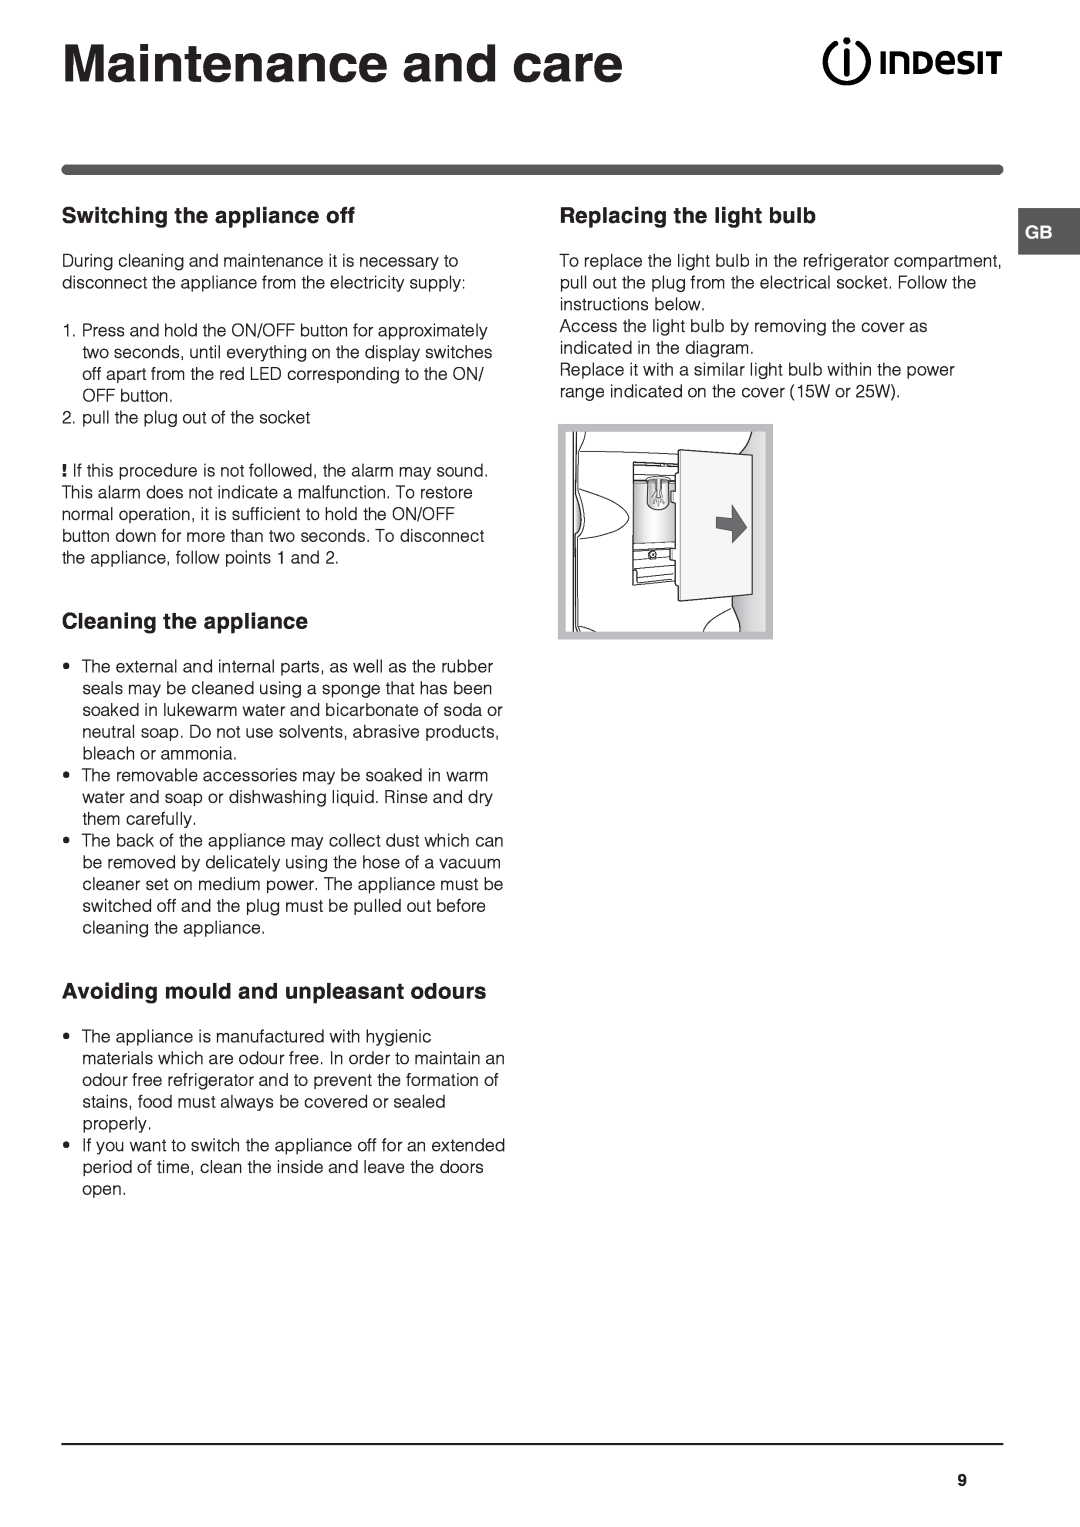 Indesit NBAA 33 NF NX D manual Maintenance and care, Switching the appliance off, Cleaning the appliance 